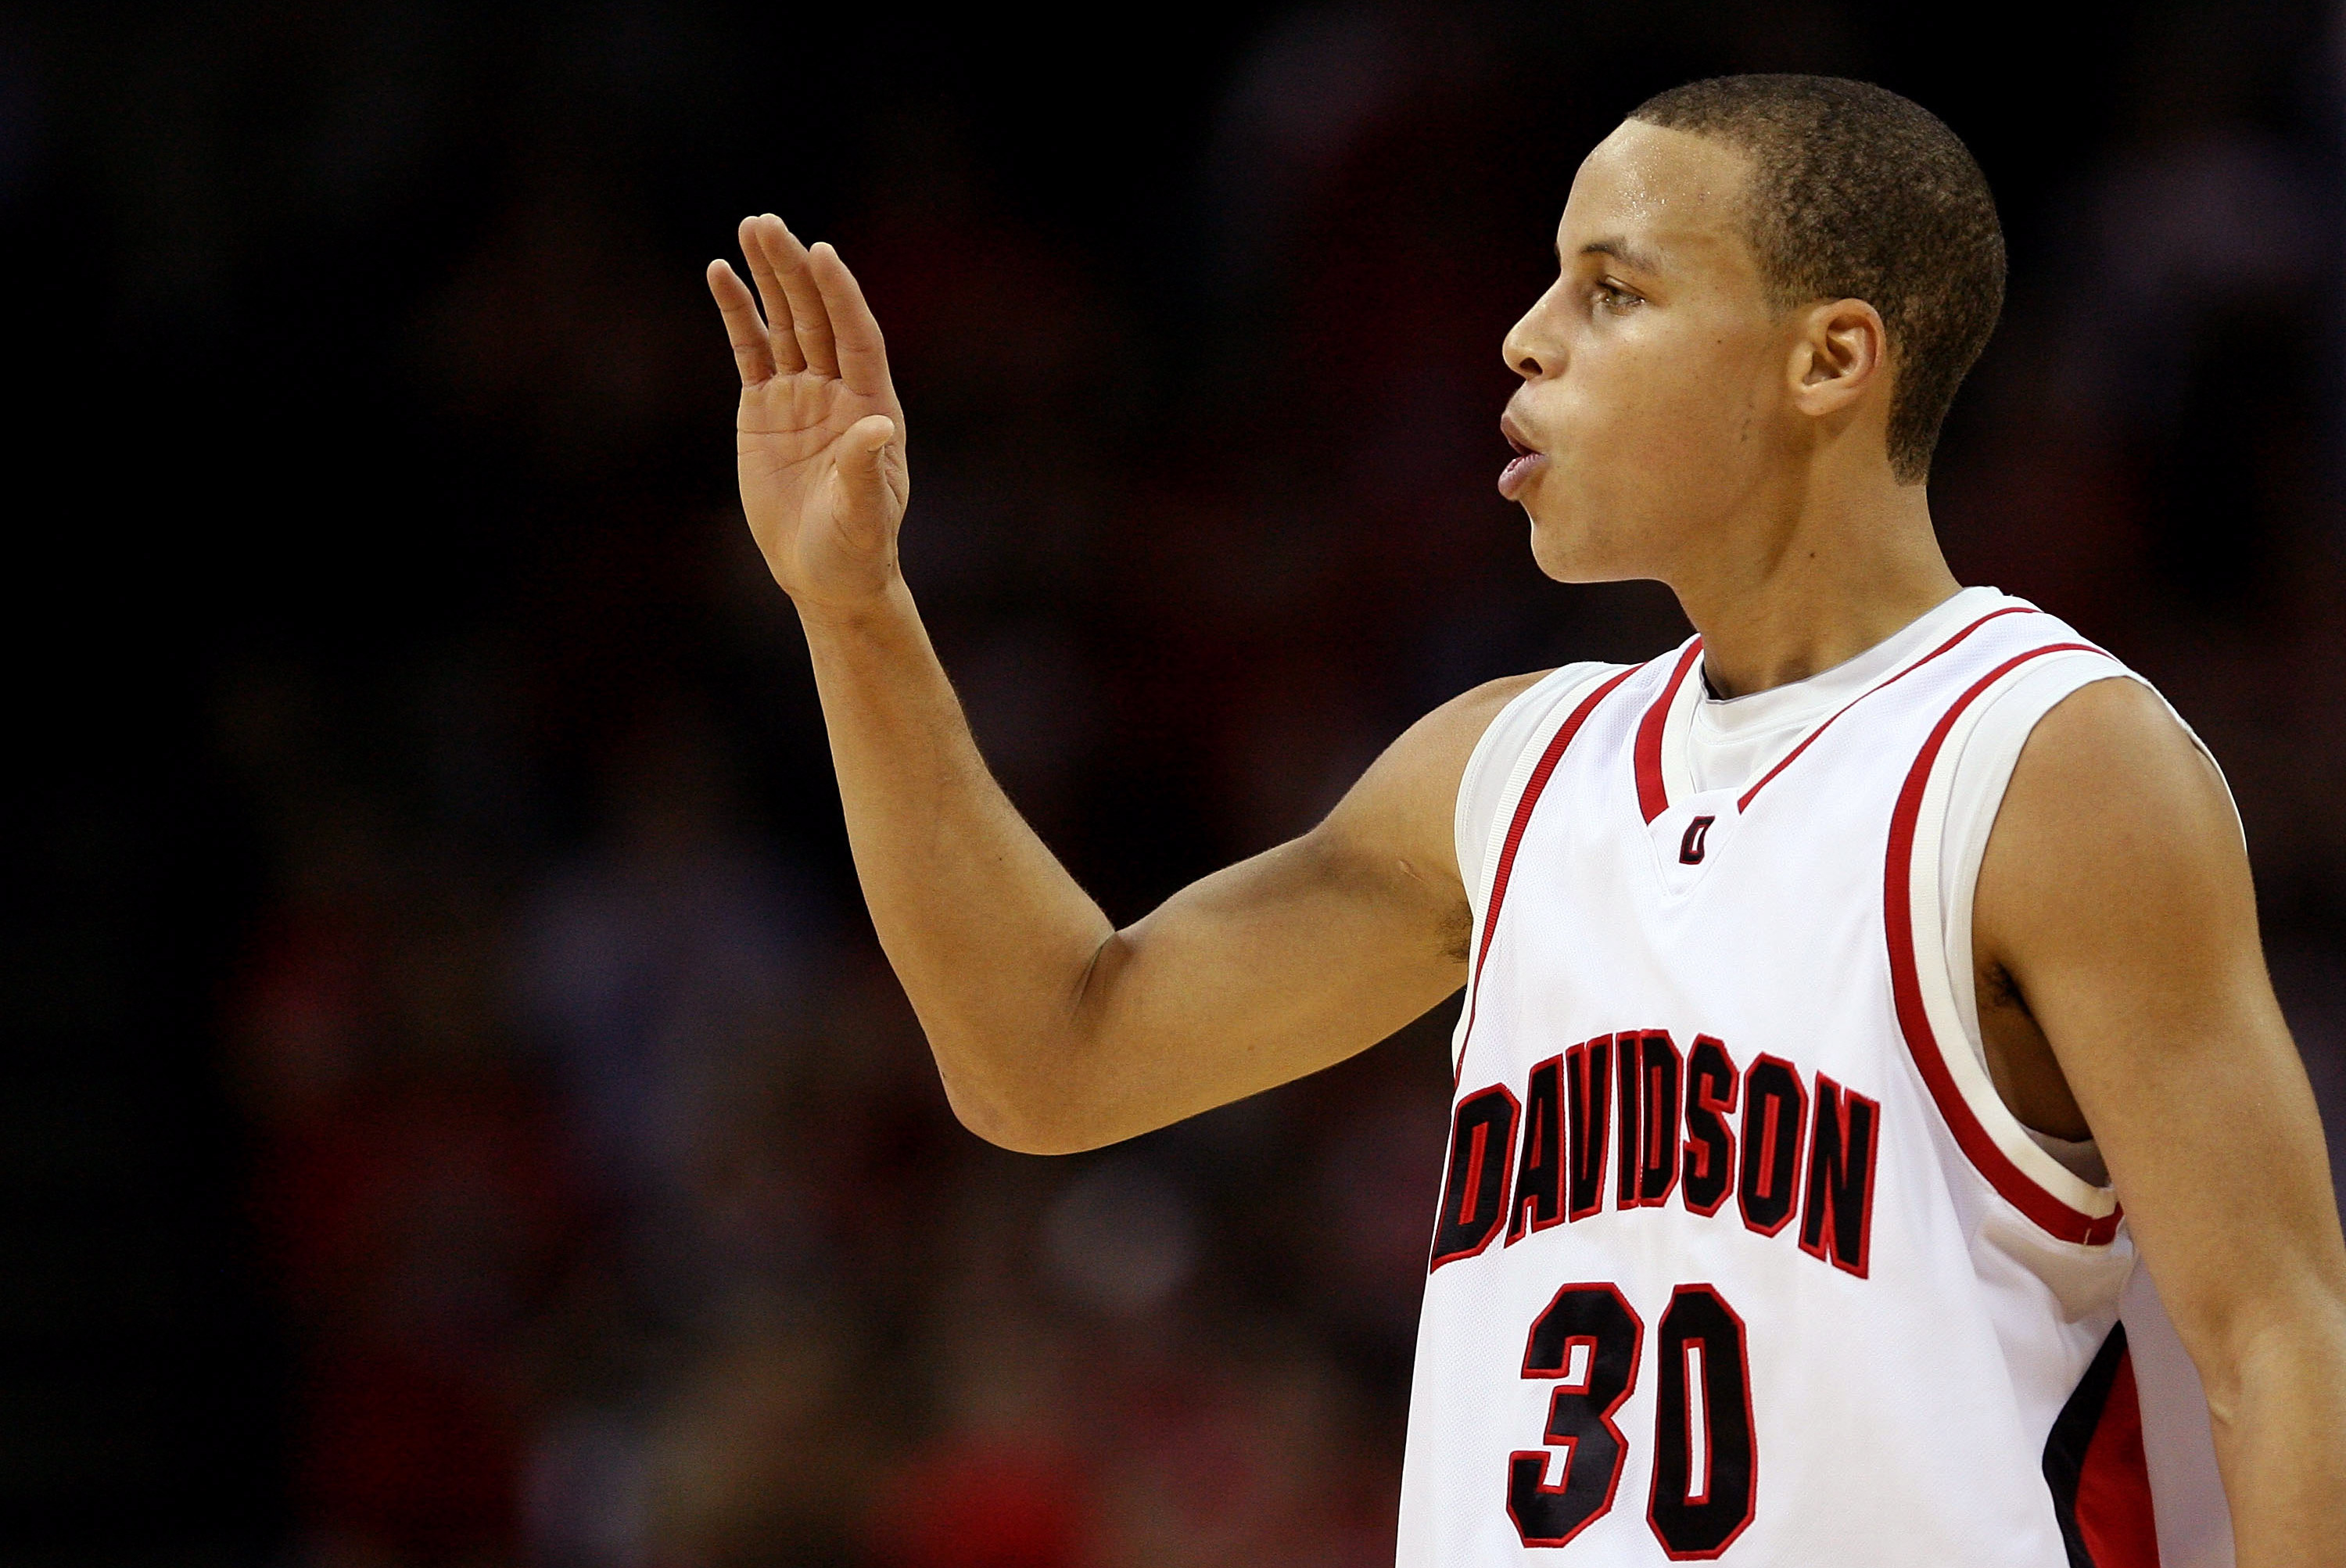 Davidson College To Retire Steph Curry's Jersey